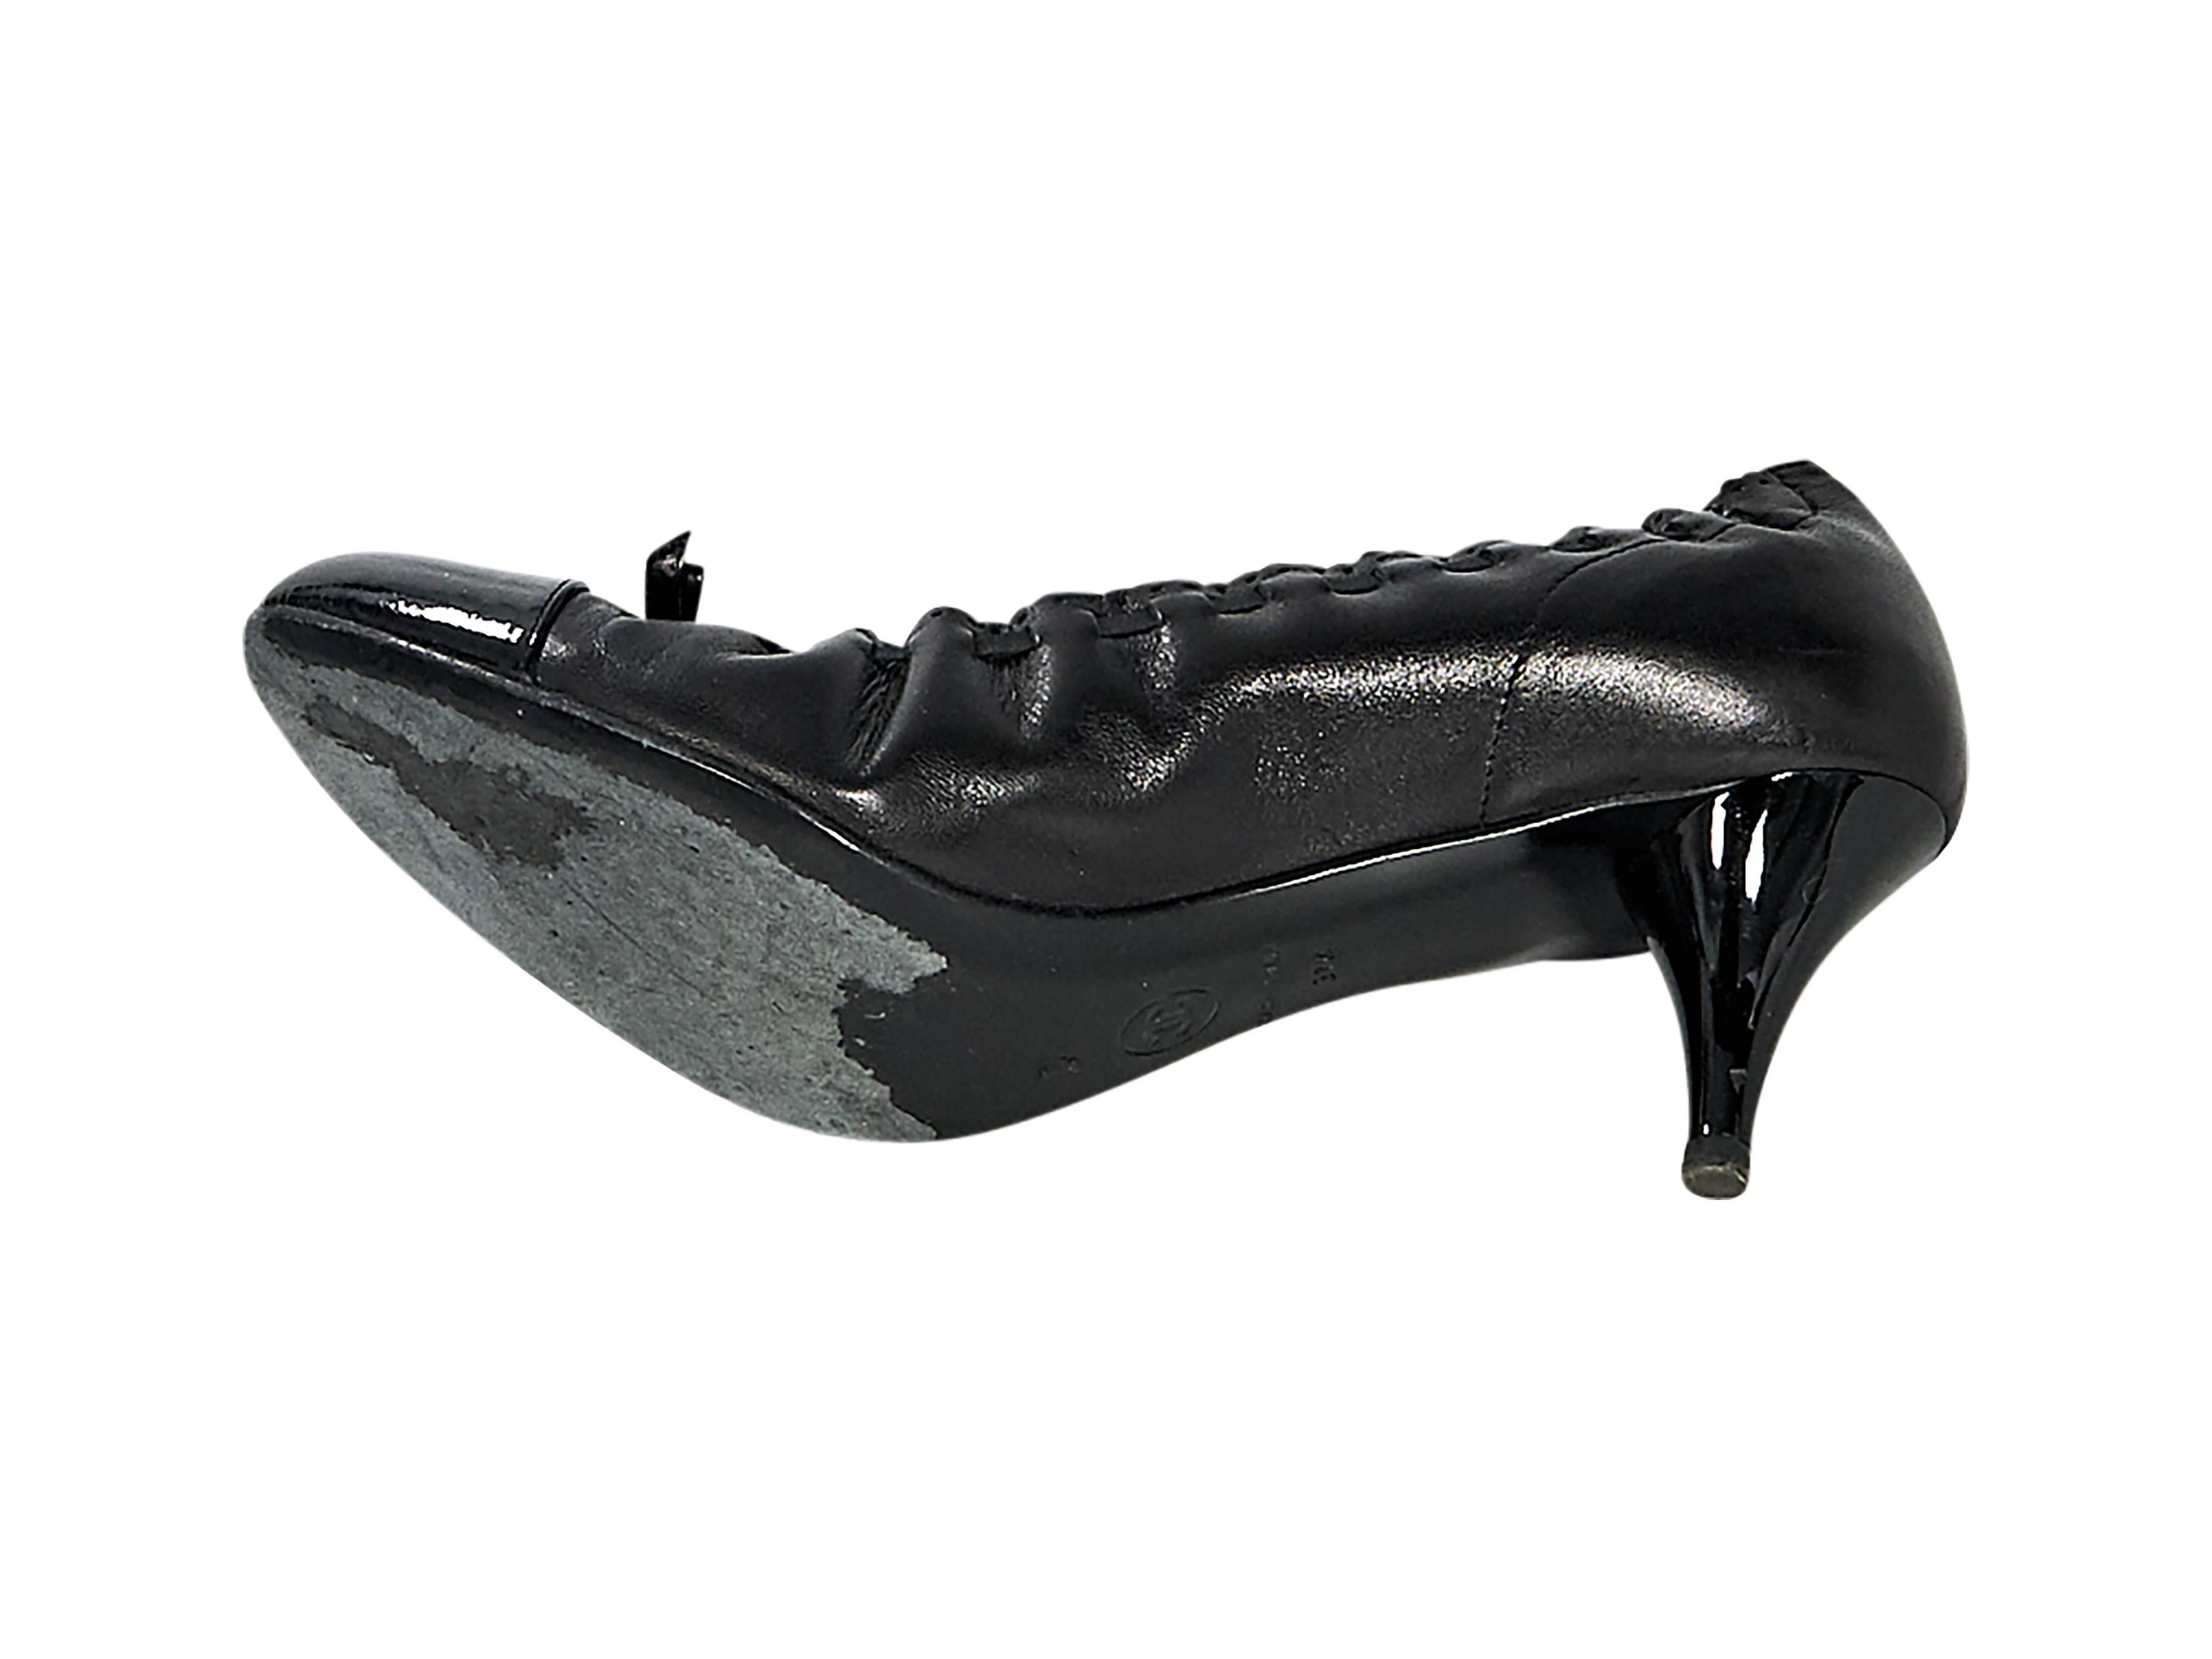 Product details:  Black leather pumps by Chanel.  Cinched top line.  Bow accents vamp.  Round patent leather cap toe.  Slip-on style. Size 7.5
Condition: Pre-owned. Very good.

Est. Retail $ 700.00
